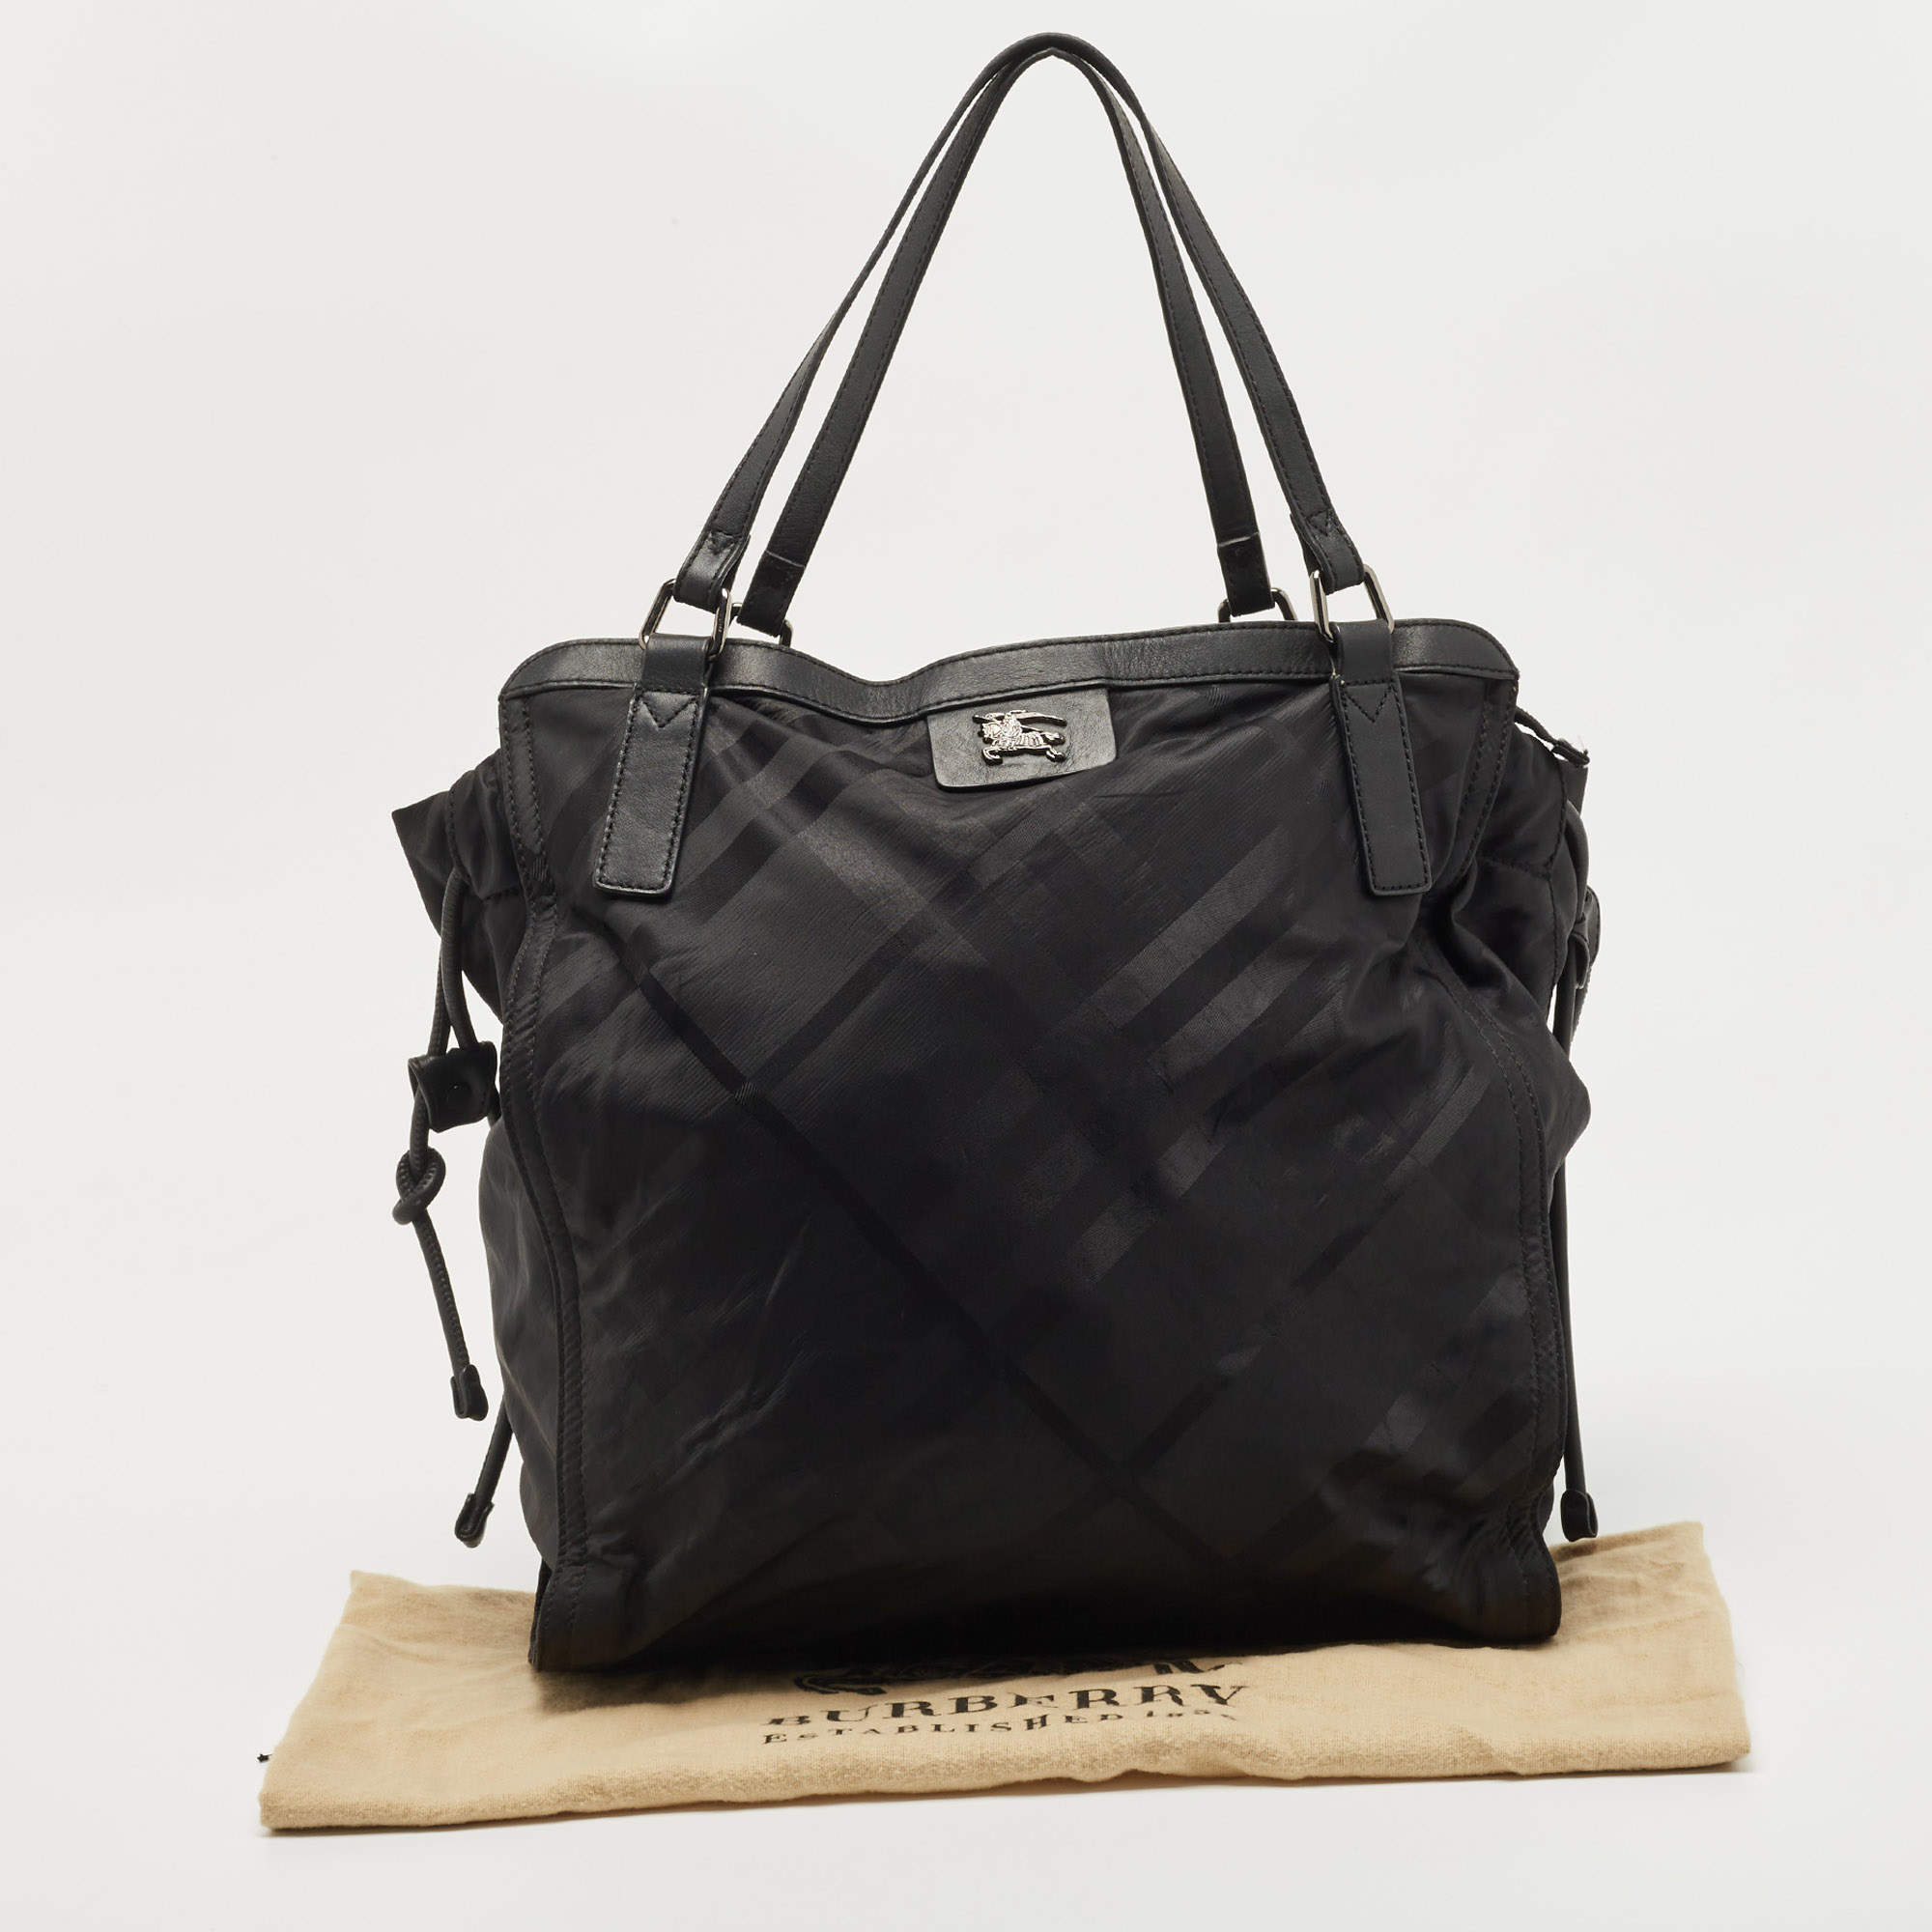 BURBERRY: nylon and leather tote bag - Black